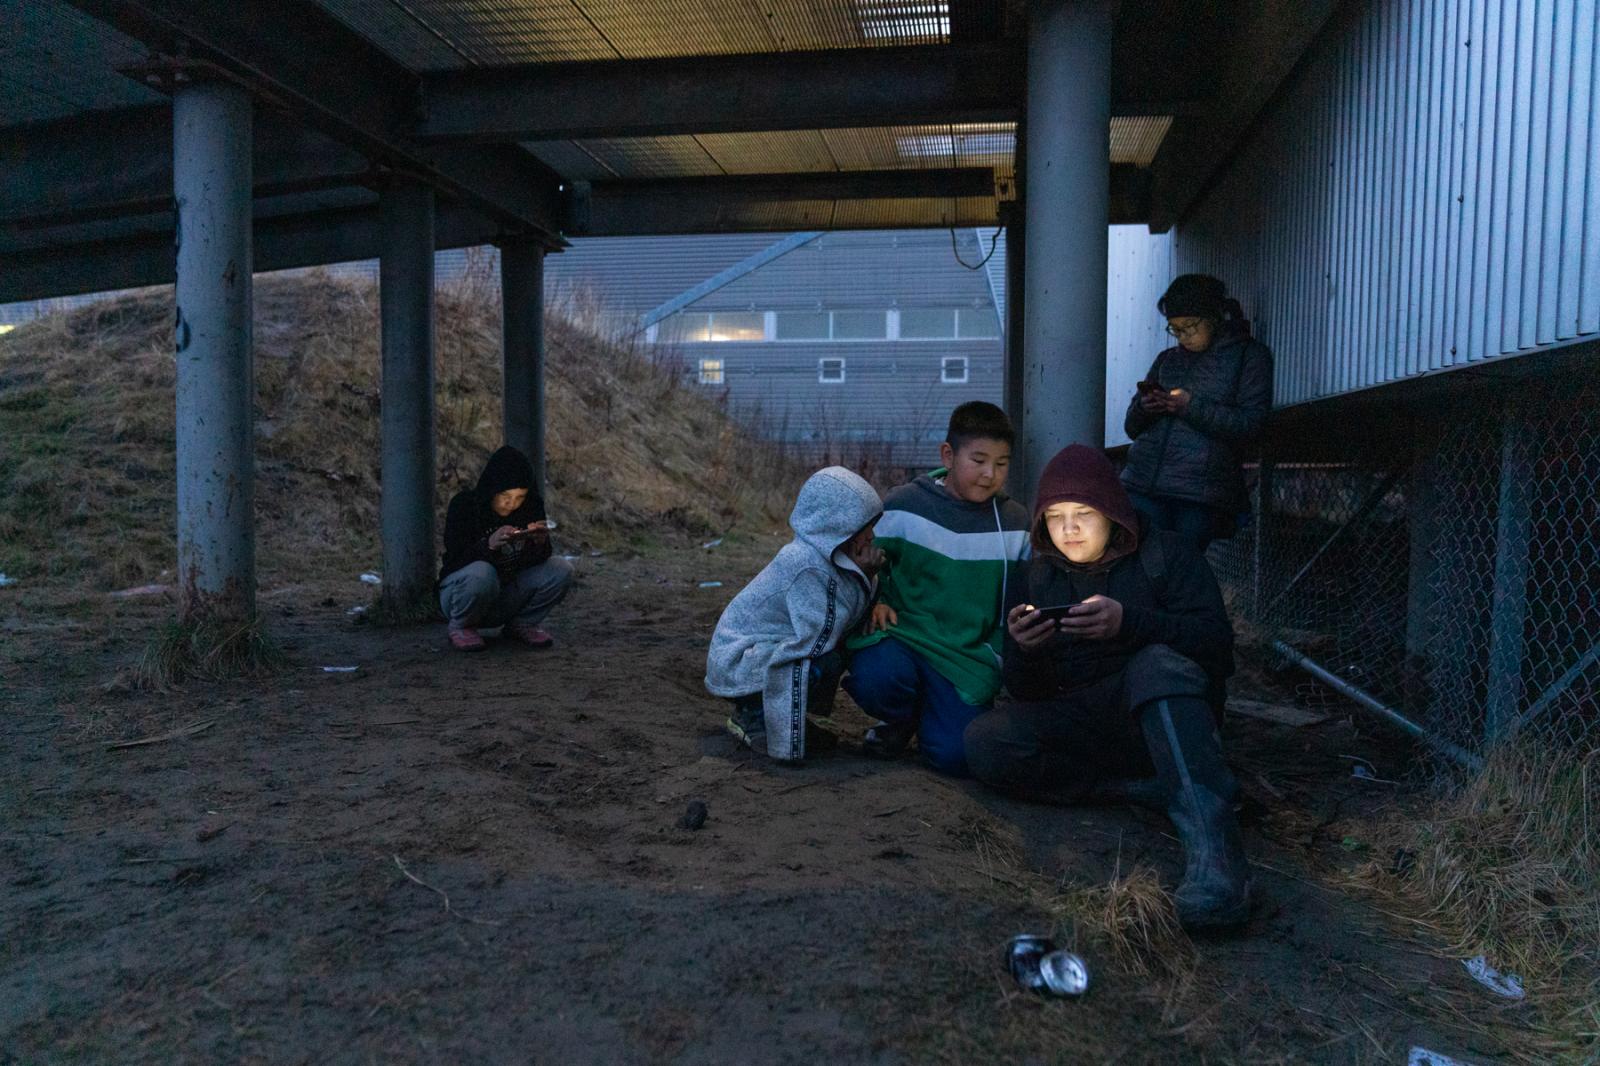 Youth hang out near the school in Akiak, Alaska to access wireless internet through their phones....